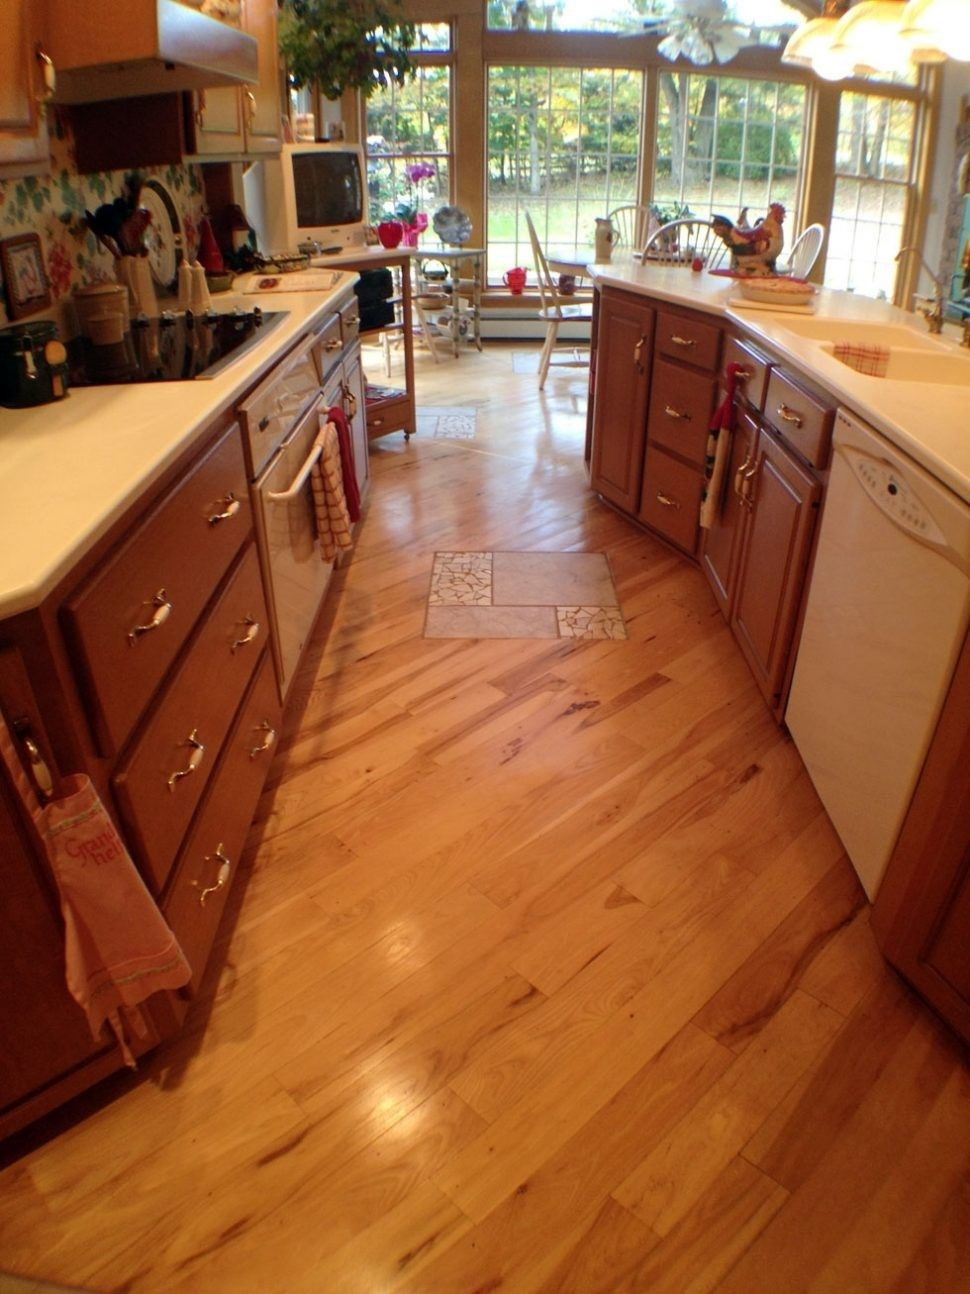 16 Awesome Cost to Sand and Stain Hardwood Floors 2022 free download cost to sand and stain hardwood floors of hardwood flooring cost per sq ft installed how much does hardwood inside hardwood flooring cost per sq ft fresh floor floor installod floors